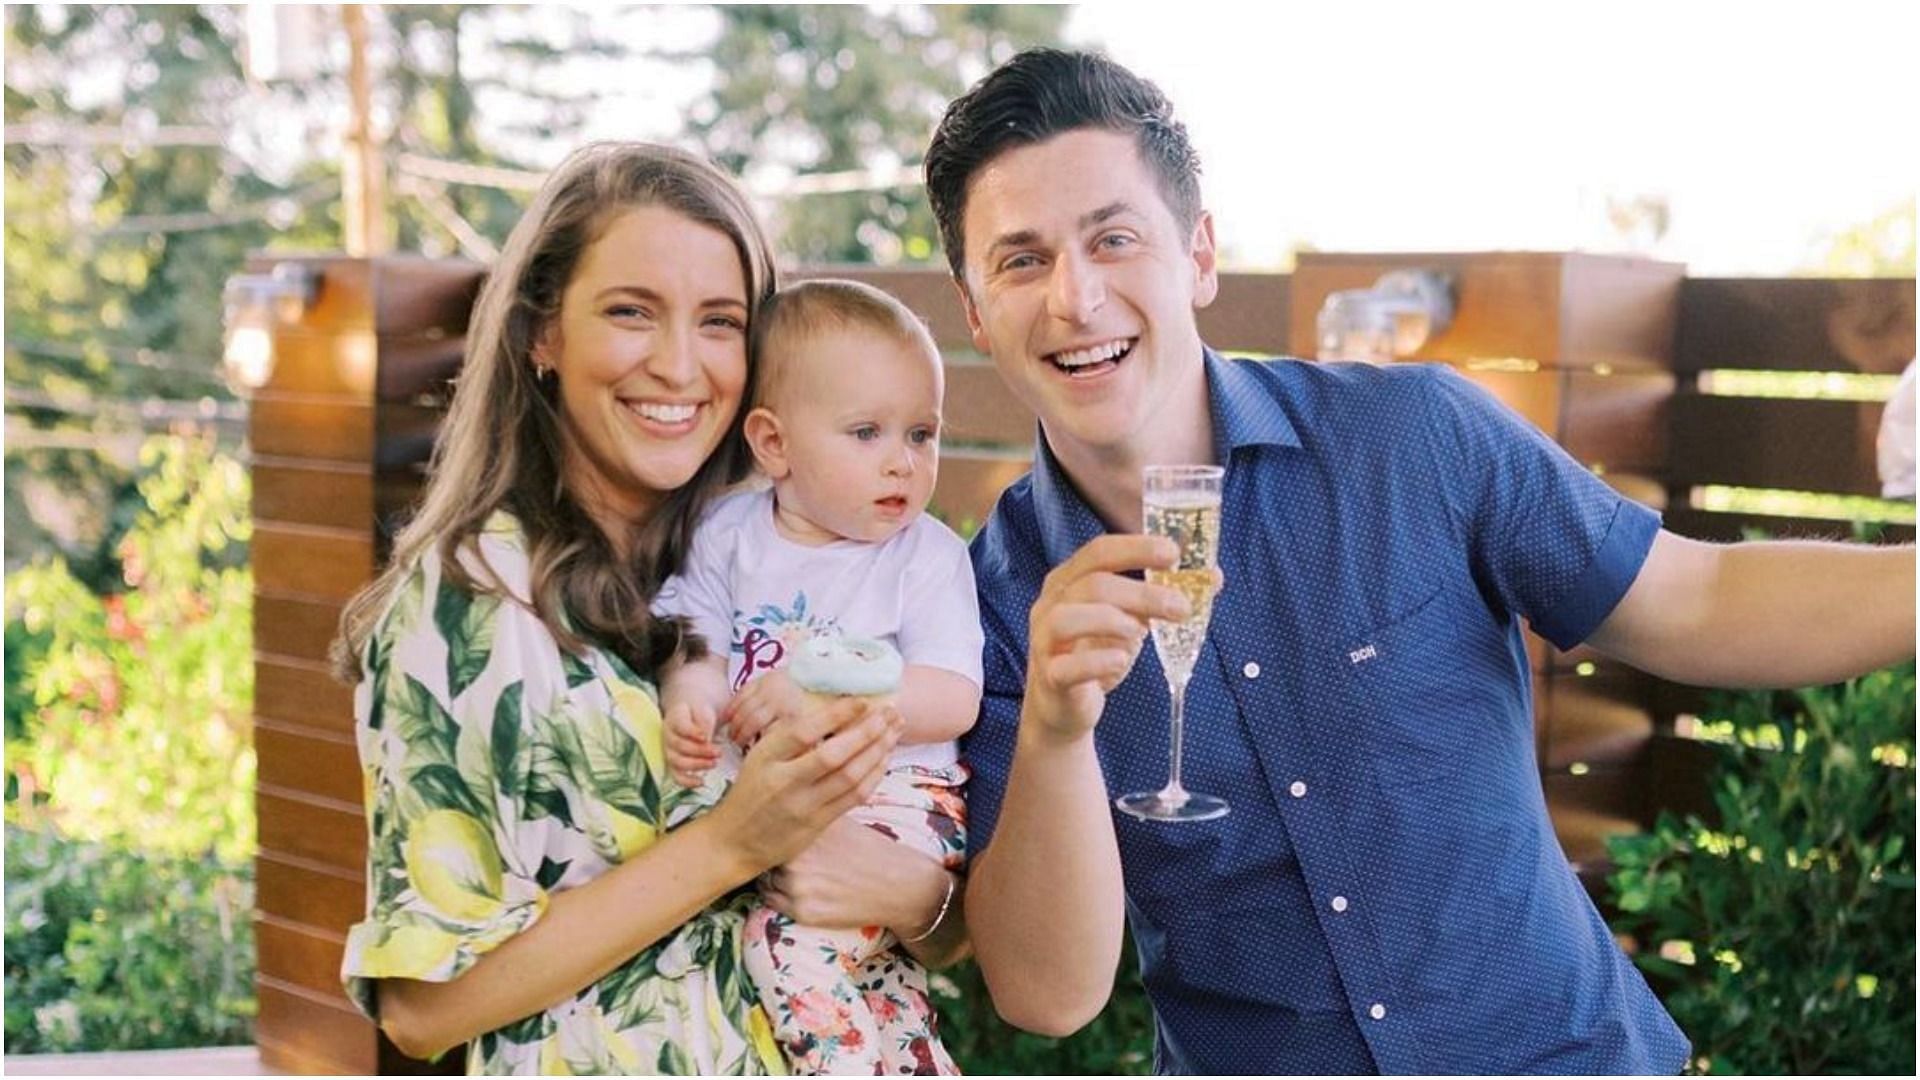 David Henrie and Maria Cahill are already the parents of two children (Image via davidhenrie/Instagram)